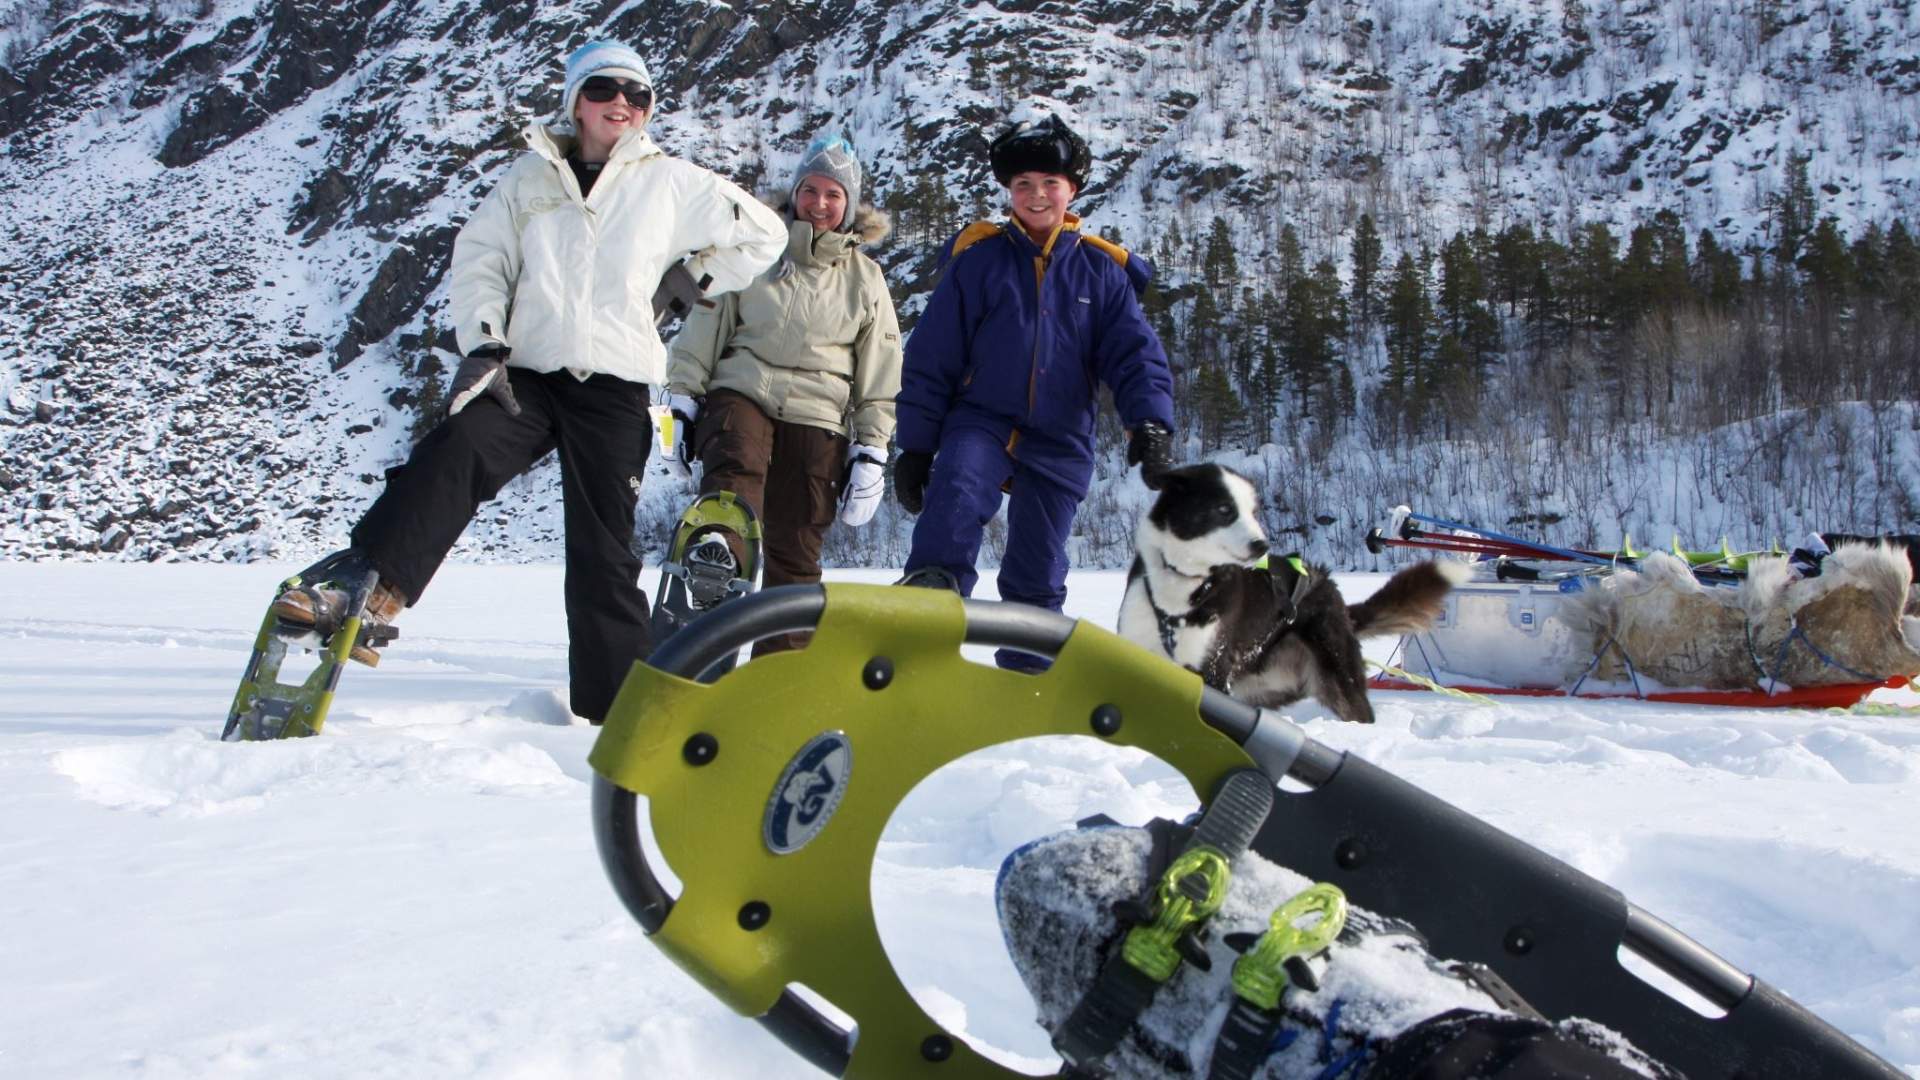 Rental of snowshoes